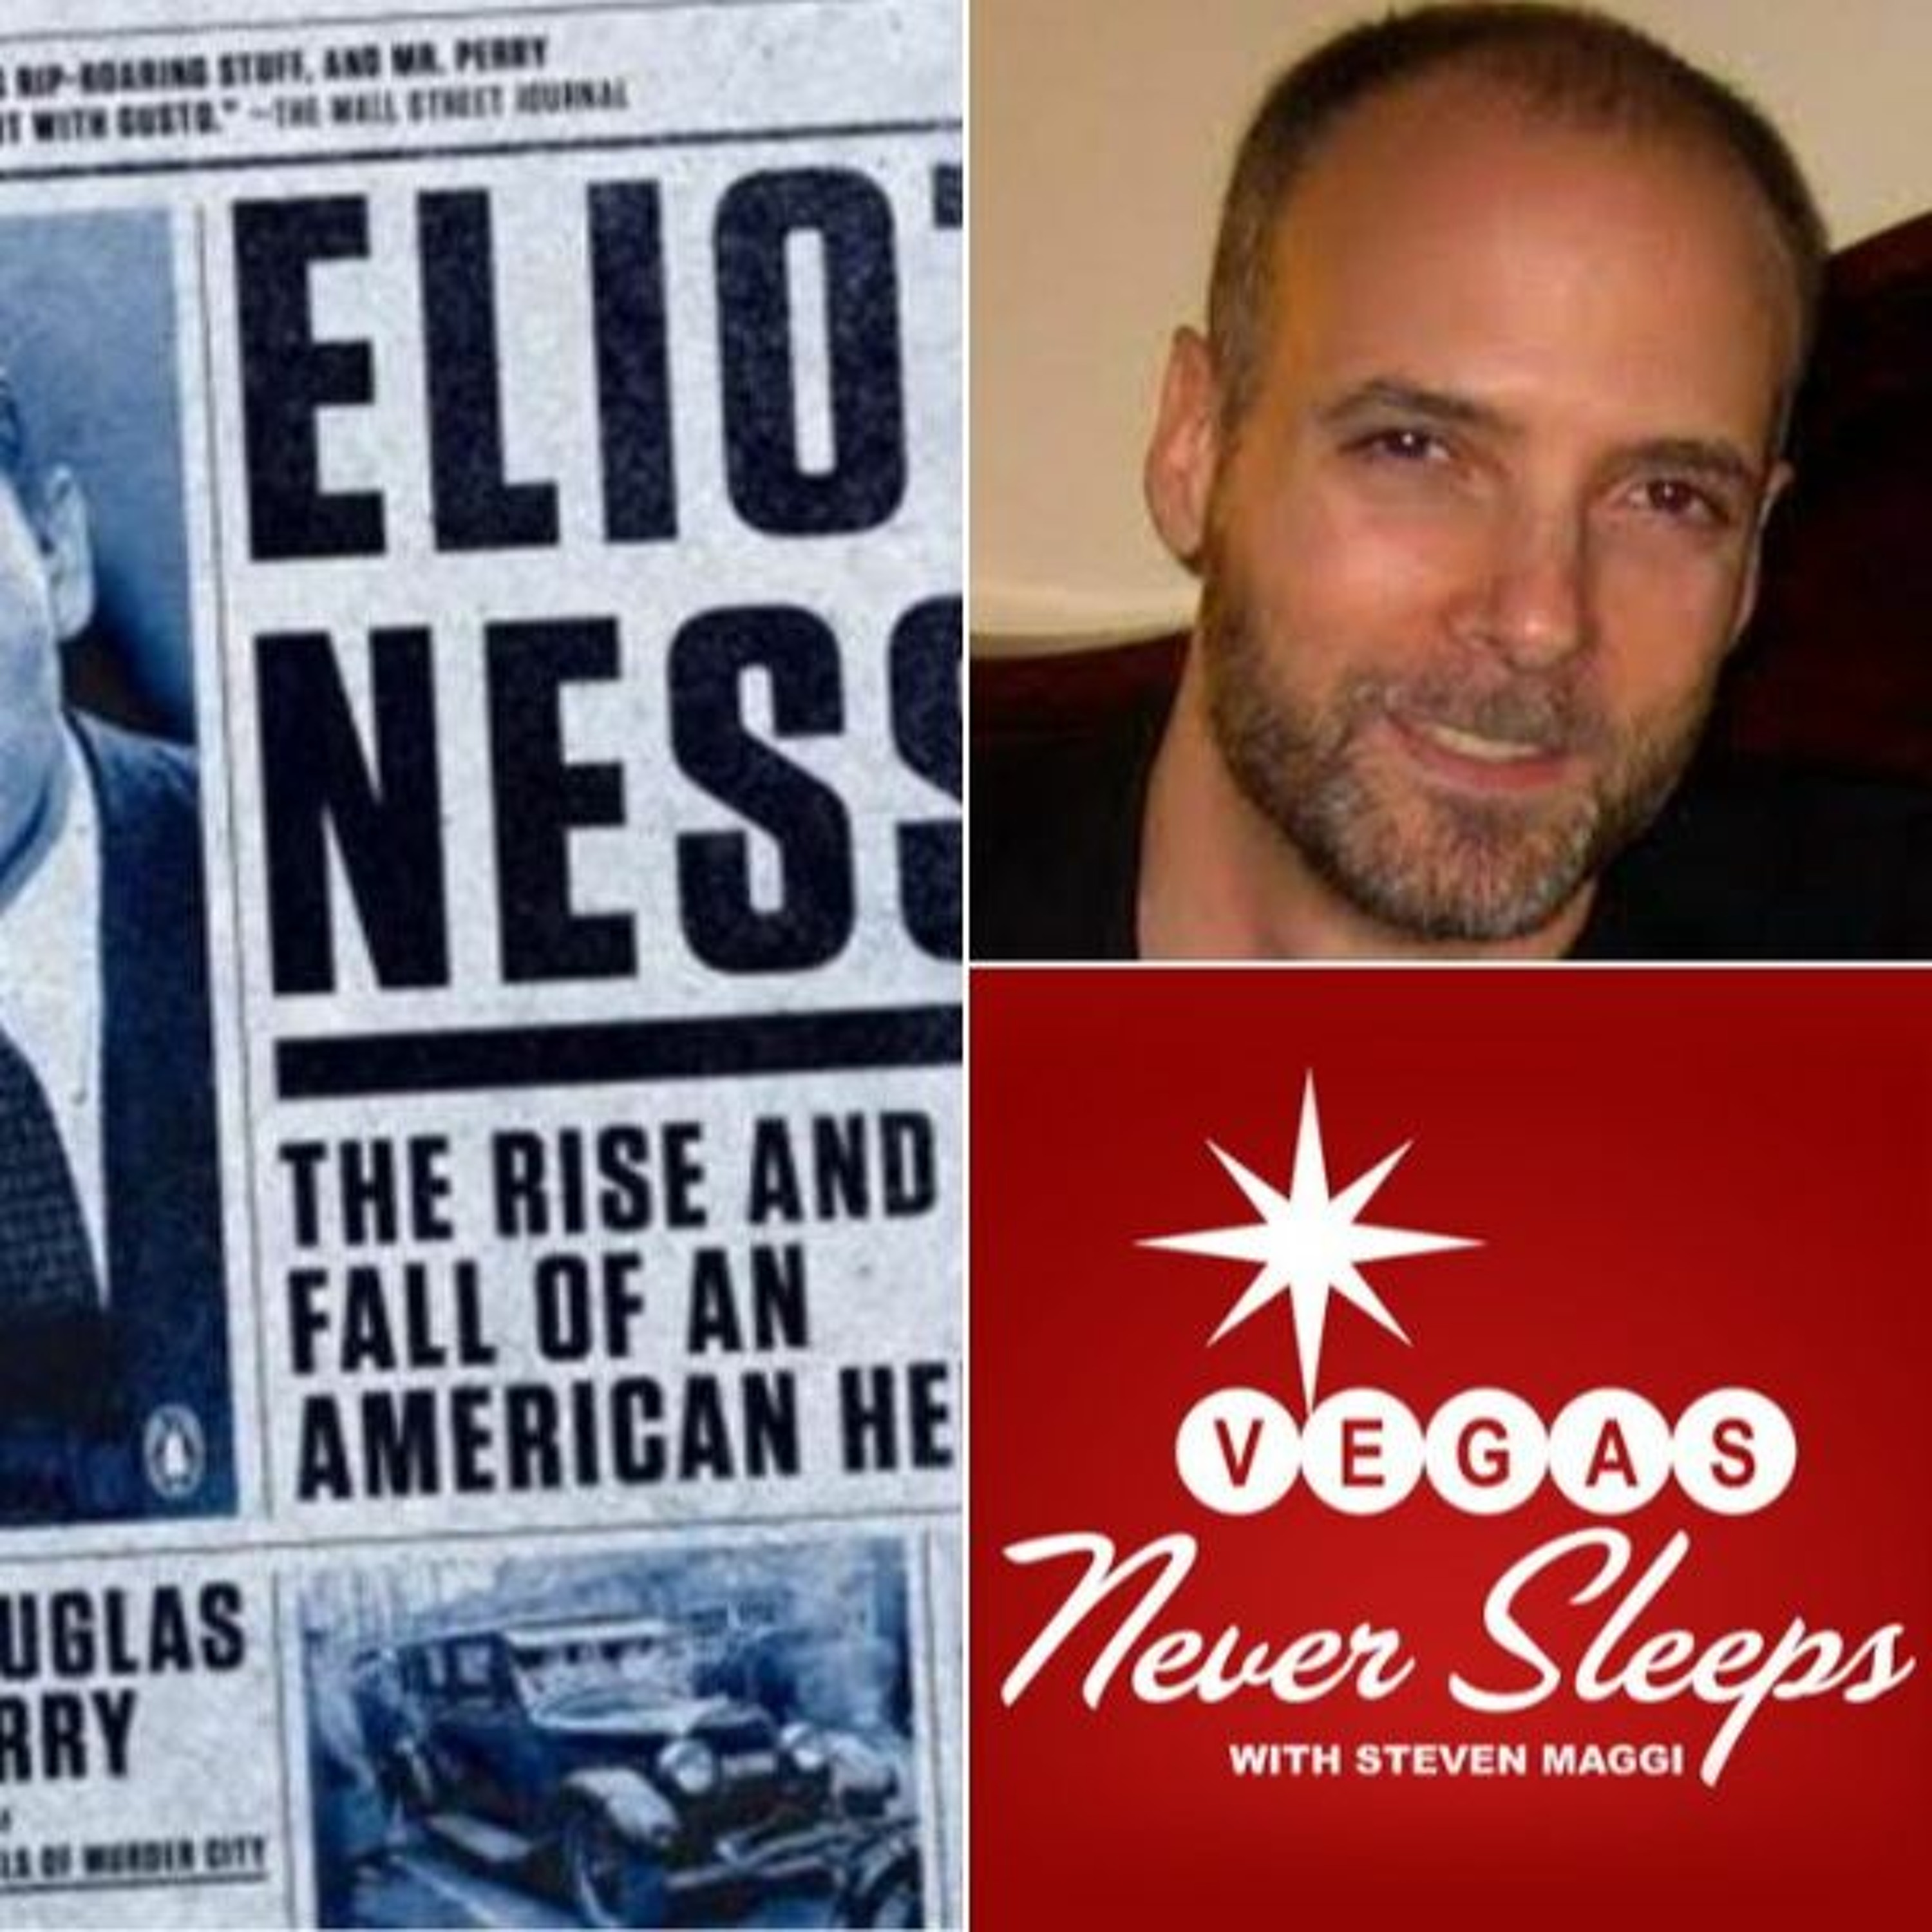 ”Eliot Ness: The Rise and Fall of an American Hero” - The Complete Douglas Perry Interview